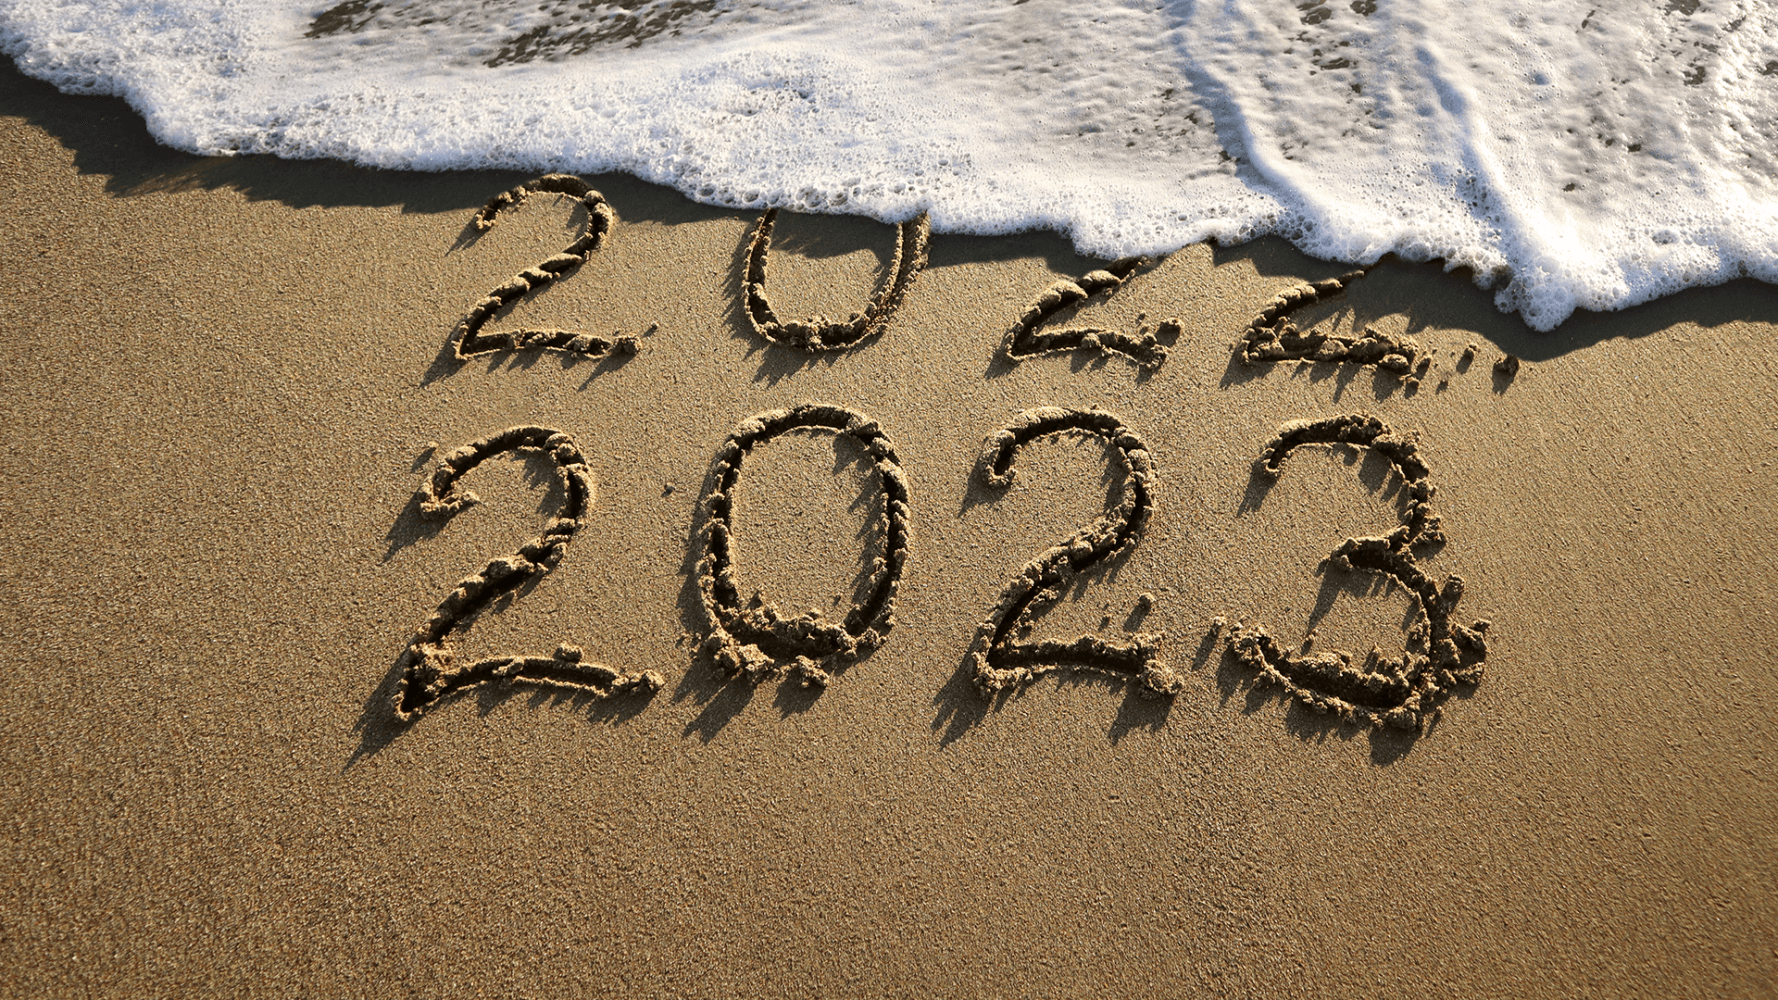 2022 is washed away by the New Year, 2023.